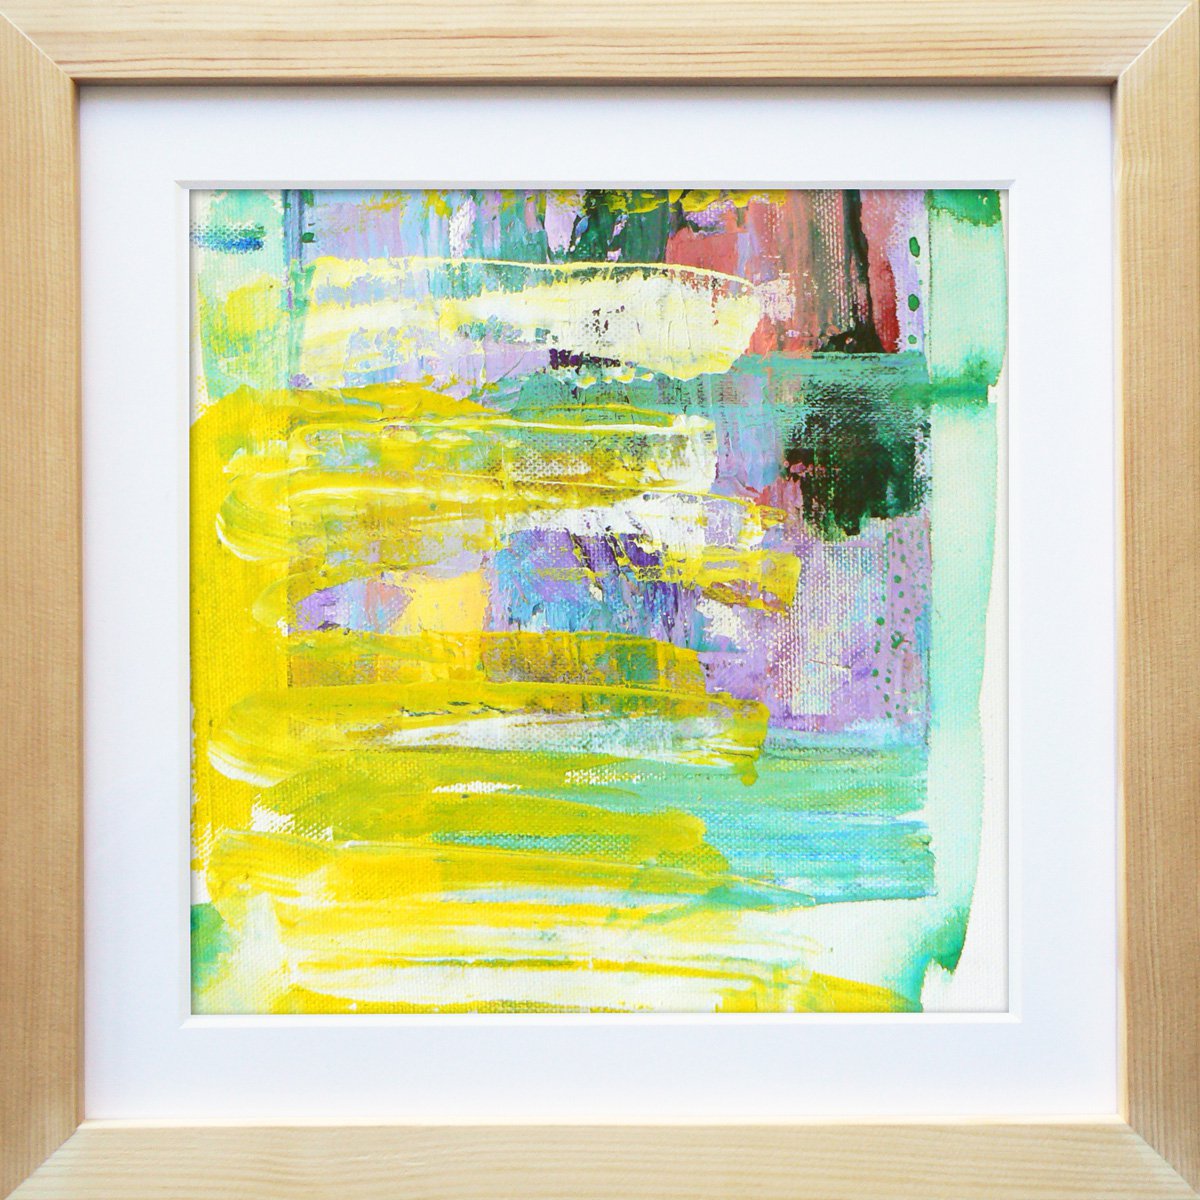 Framed ready to hang original abstract - abstract on canvas by Carolynne Coulson